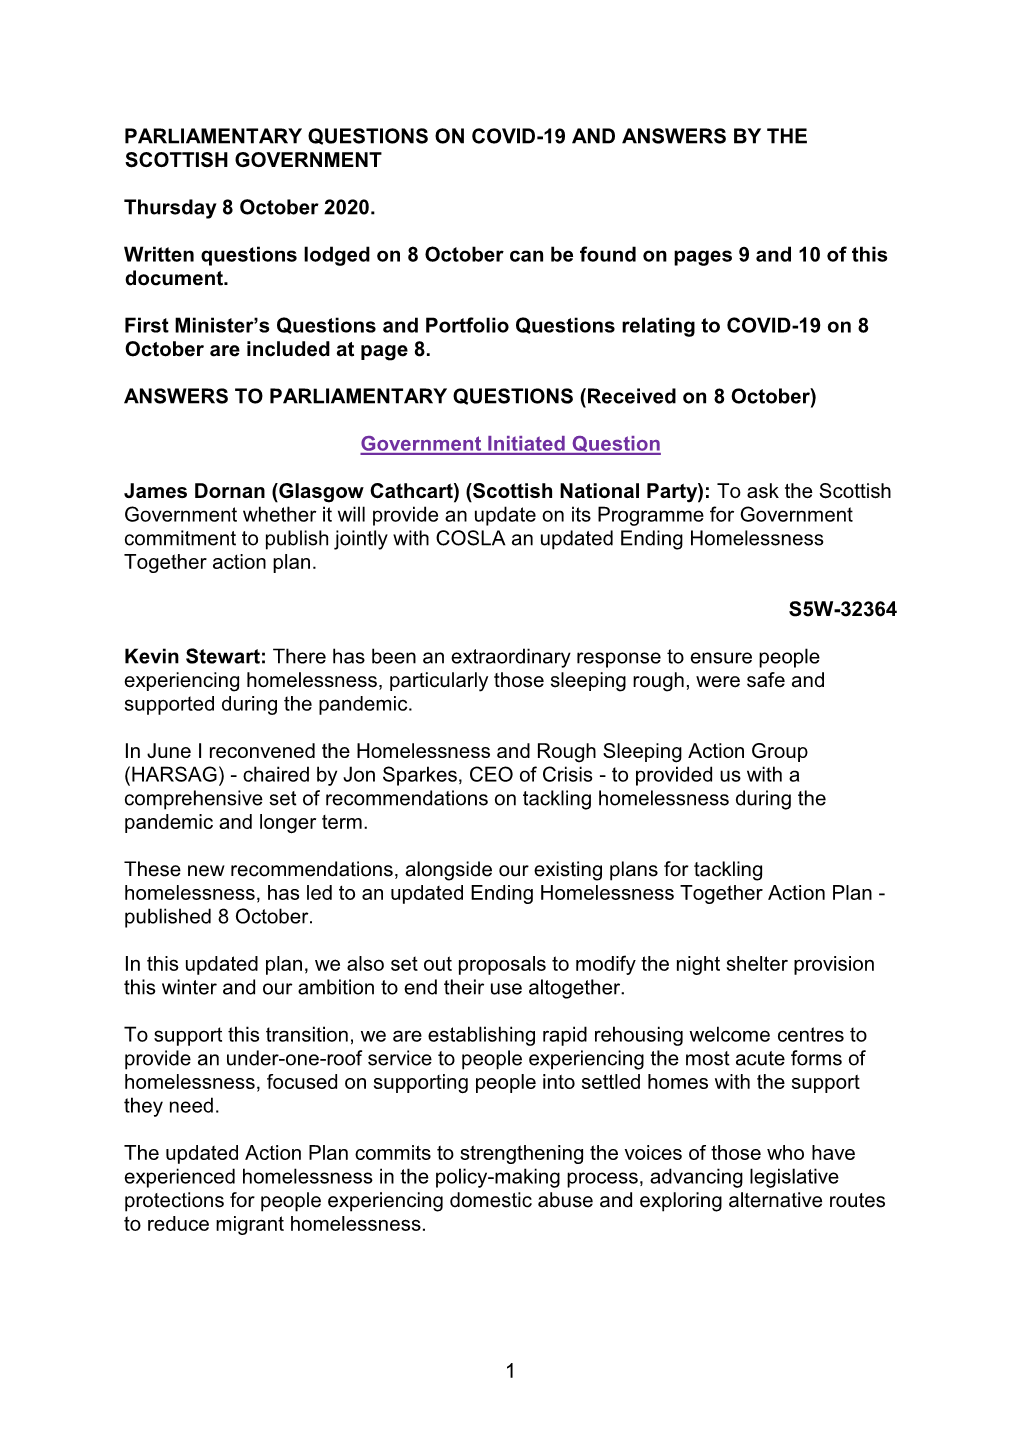 COVID-19 Question and Answer Report Thursday 8 October 2020